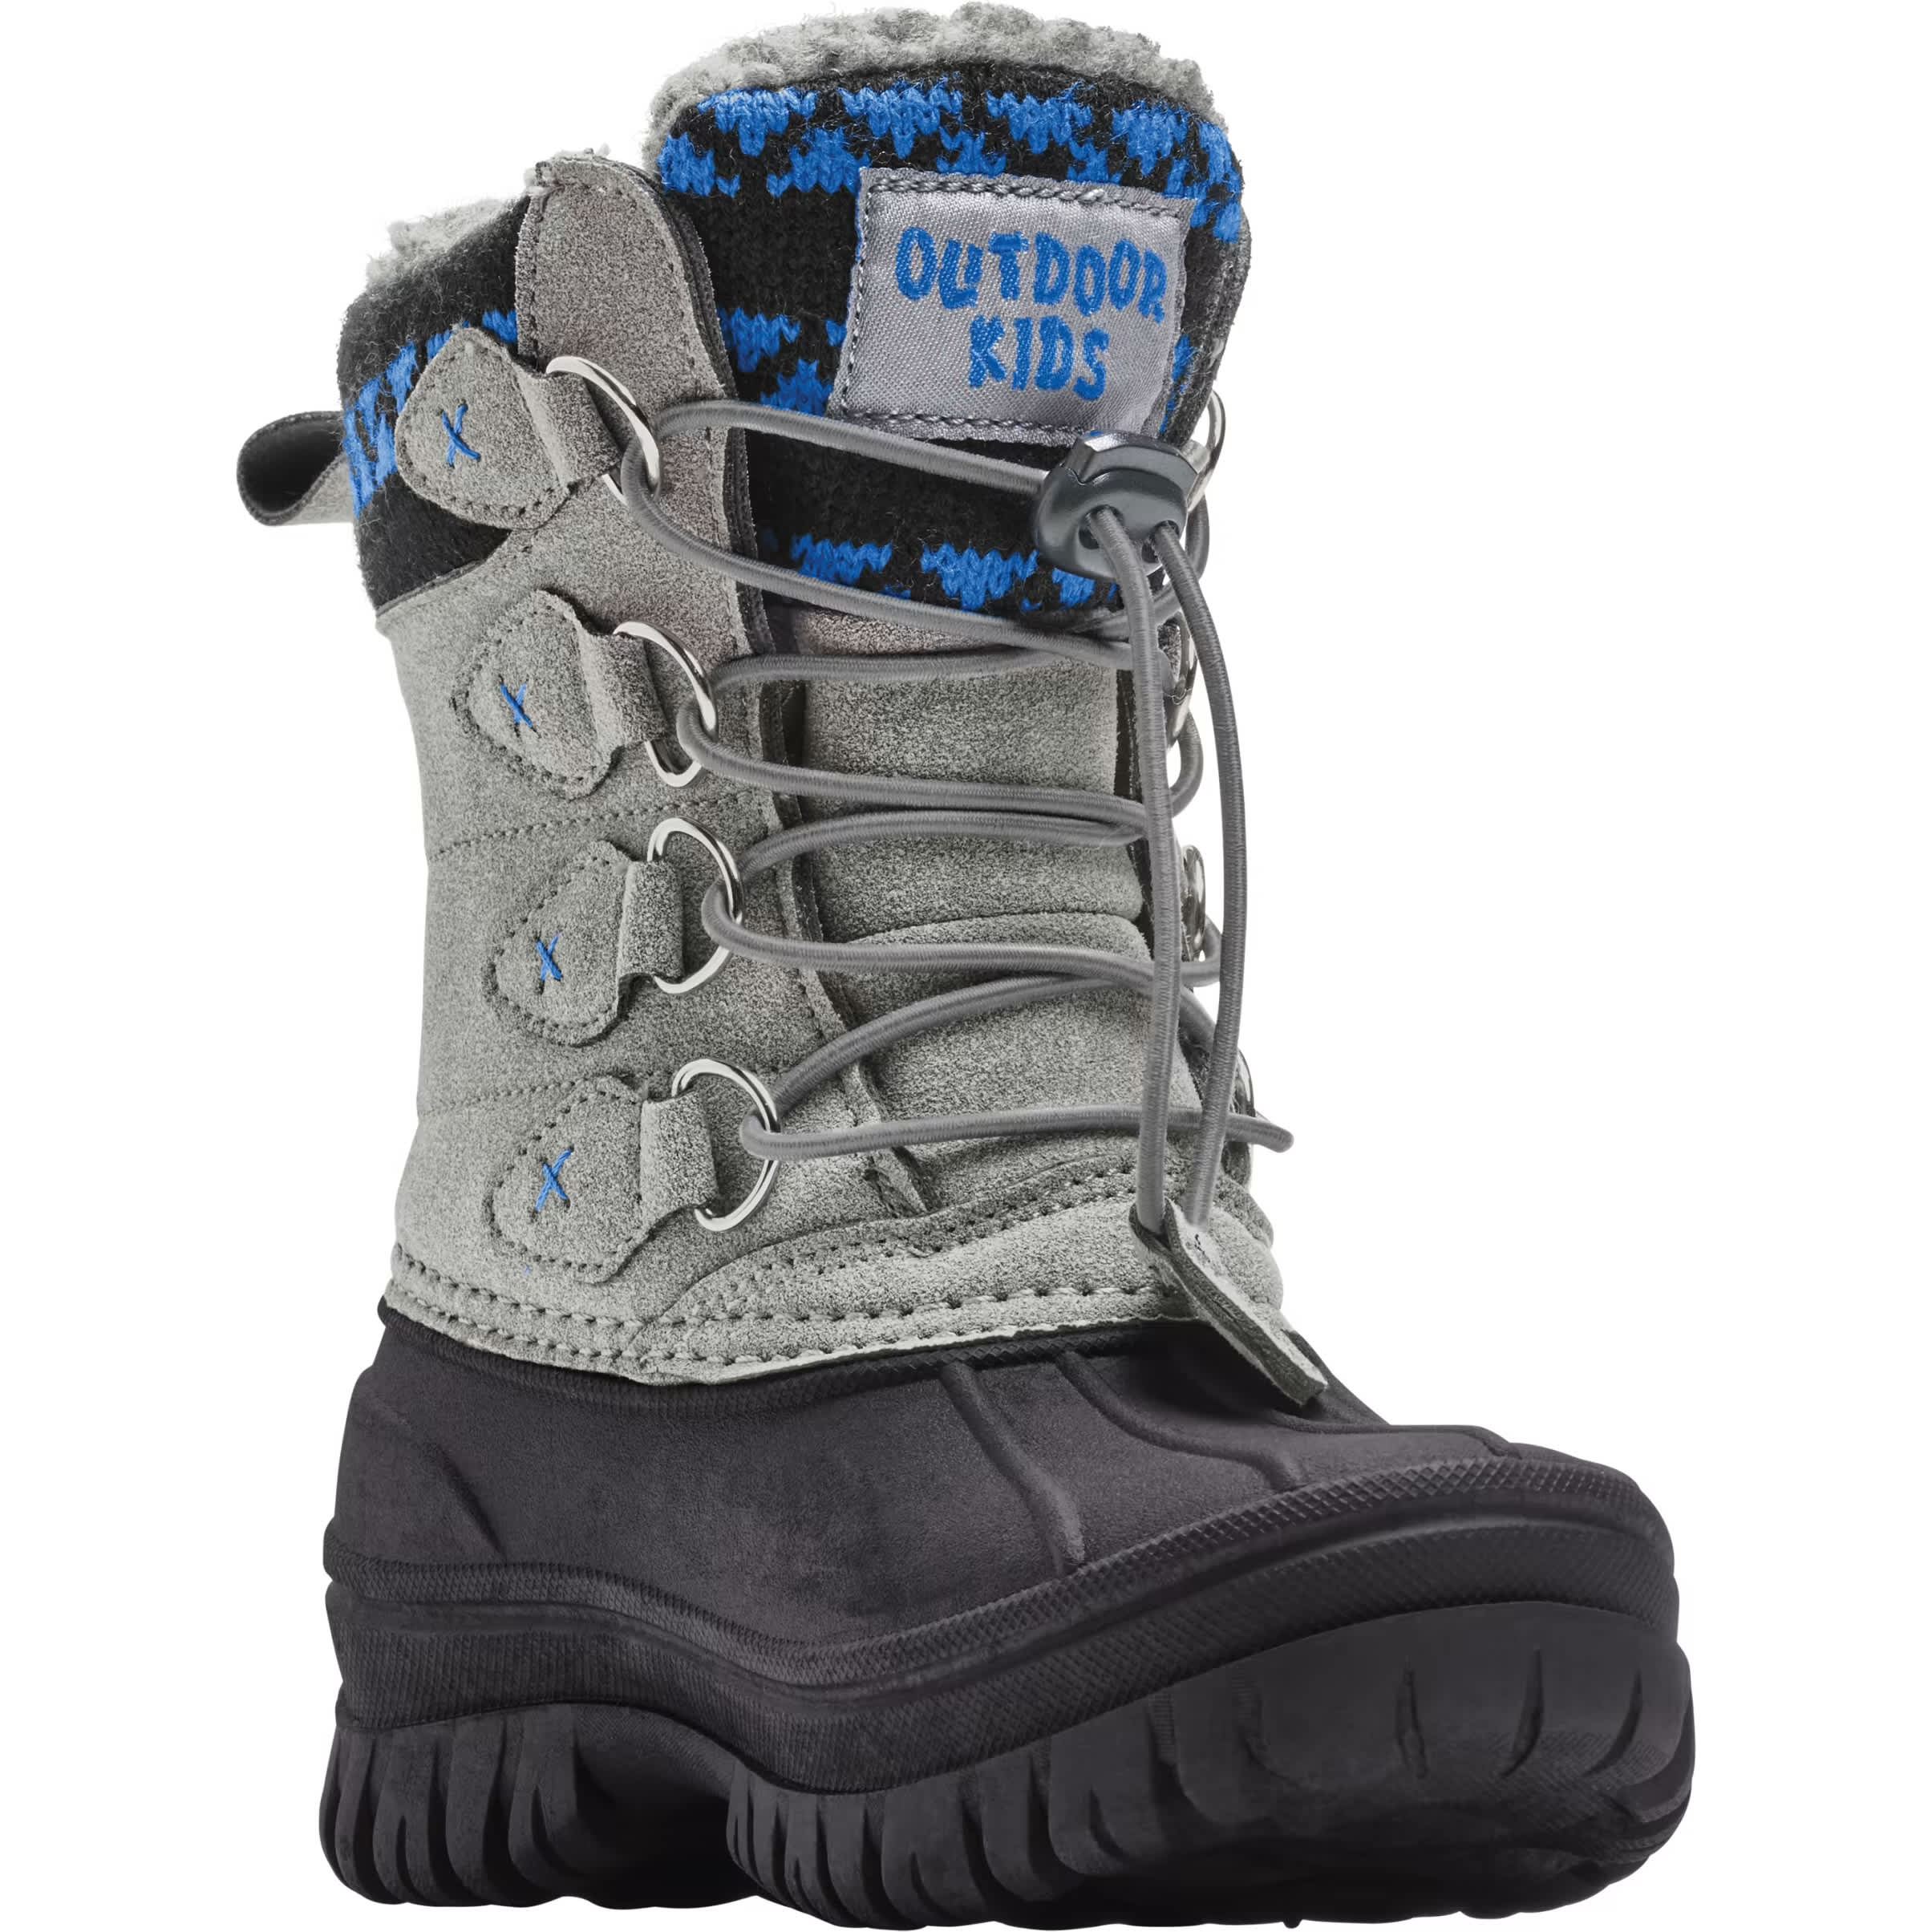 Outdoor Kids® Children’s Lucerne Insulated Pac Boots